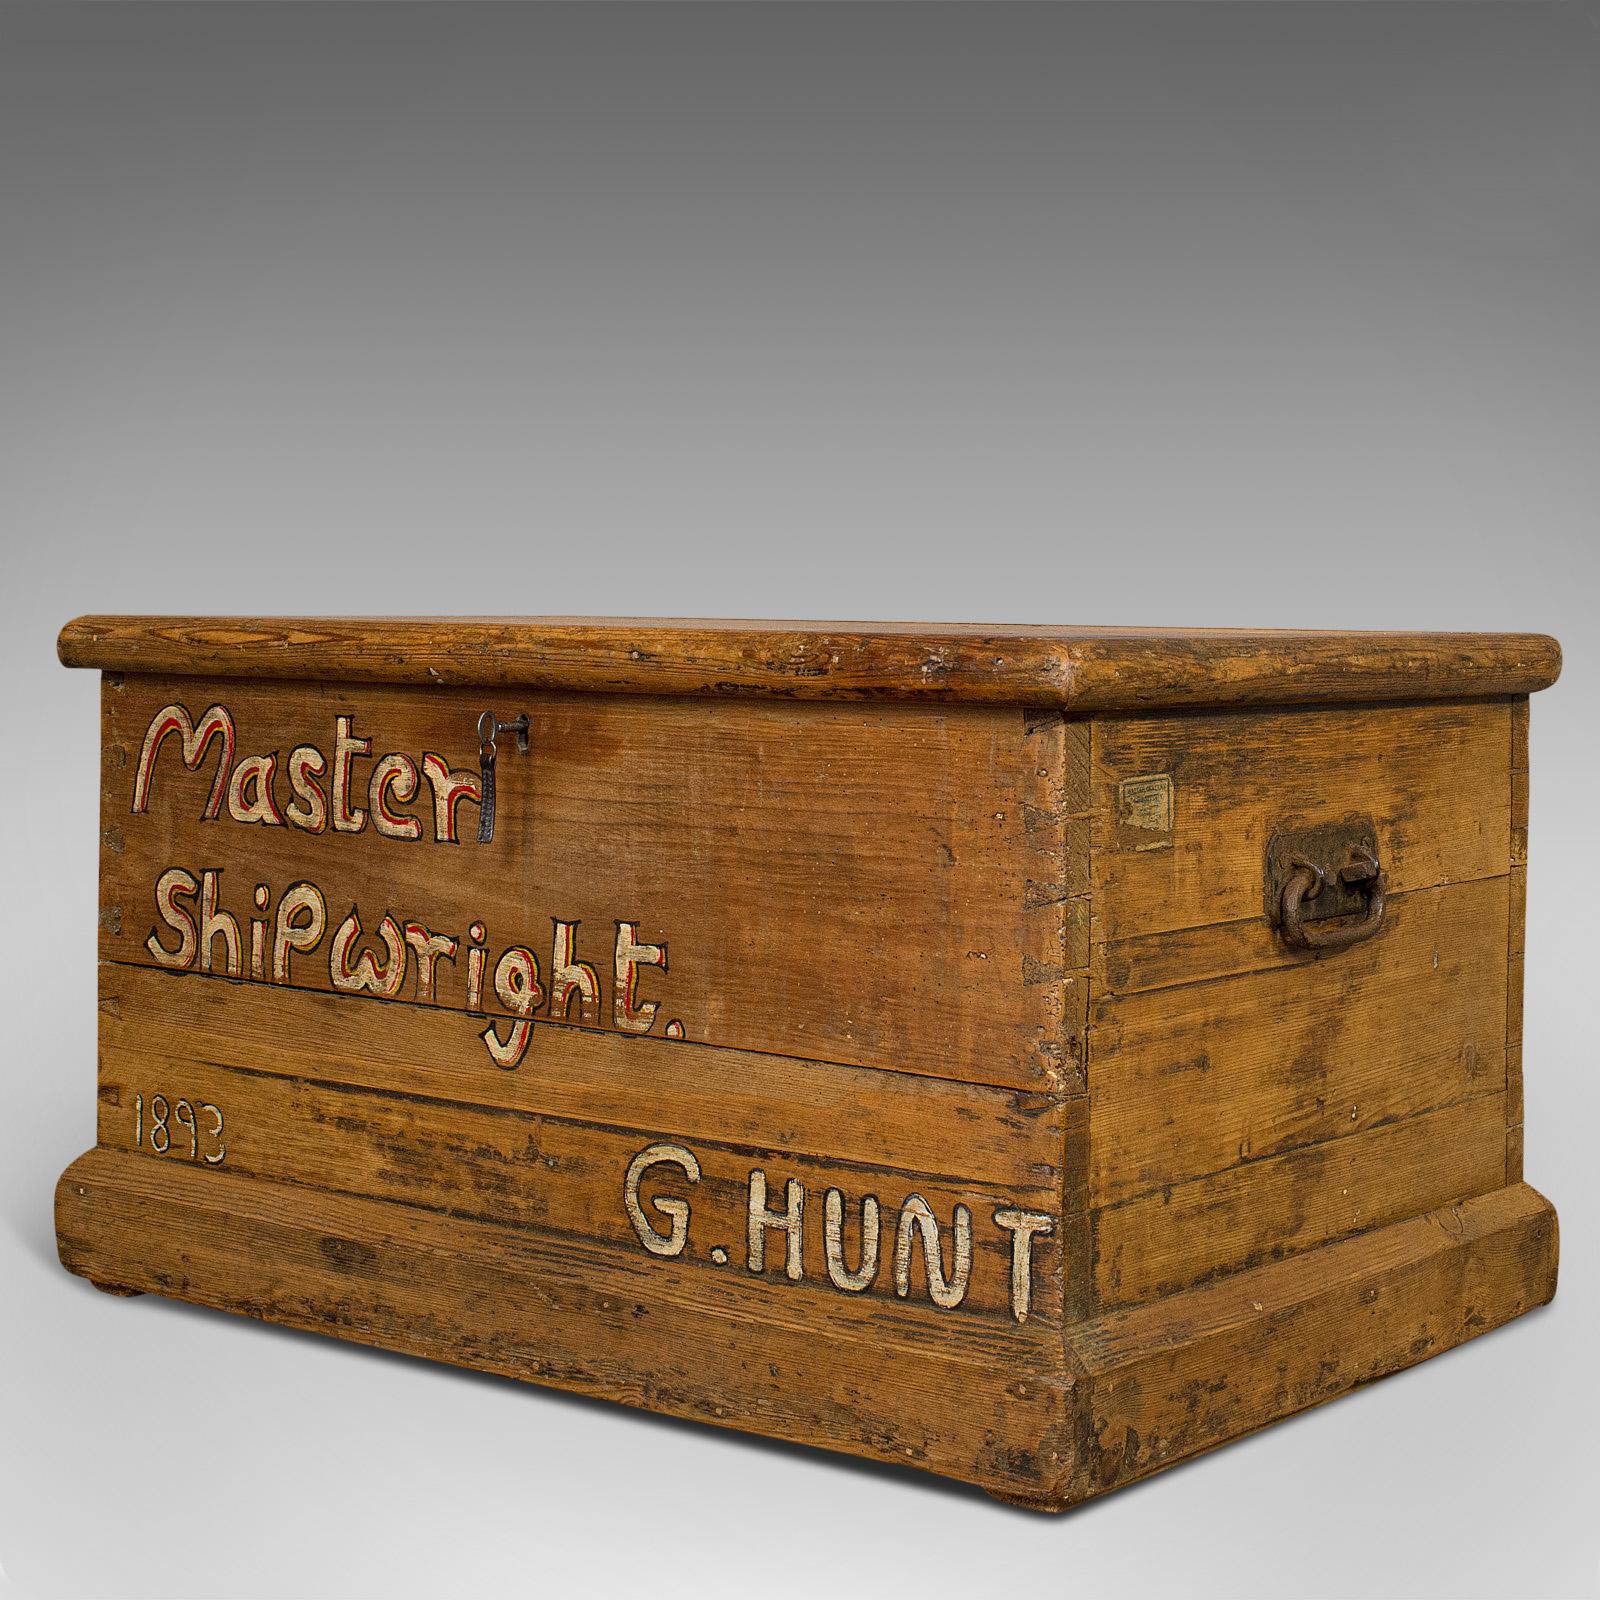 Hand-Painted Antique Shipwright's Tool Chest, English, Pine, Merchant's, Trunk, circa 1870